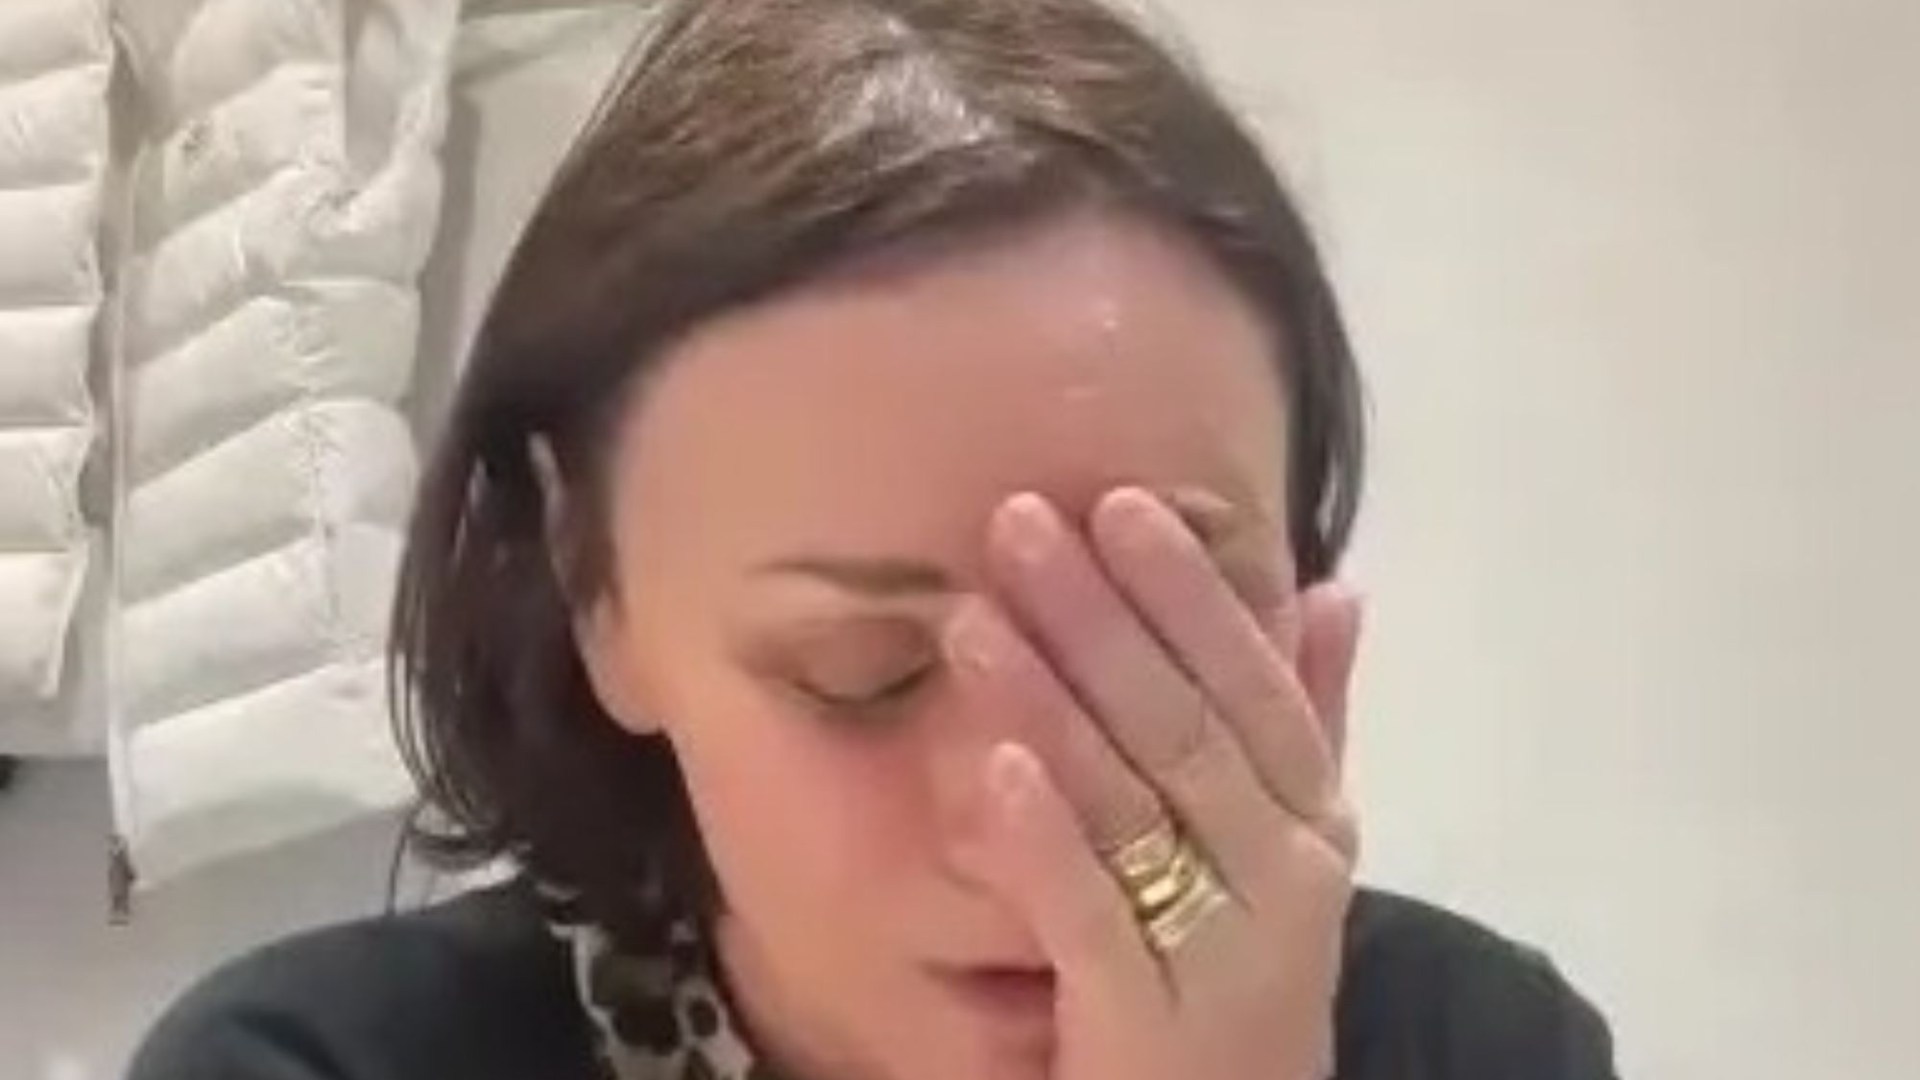 I fear Ive worked myself to death, admits Strictlys Shirley Ballas after revealing terrifying cancer scare  The Irish Sun [Video]